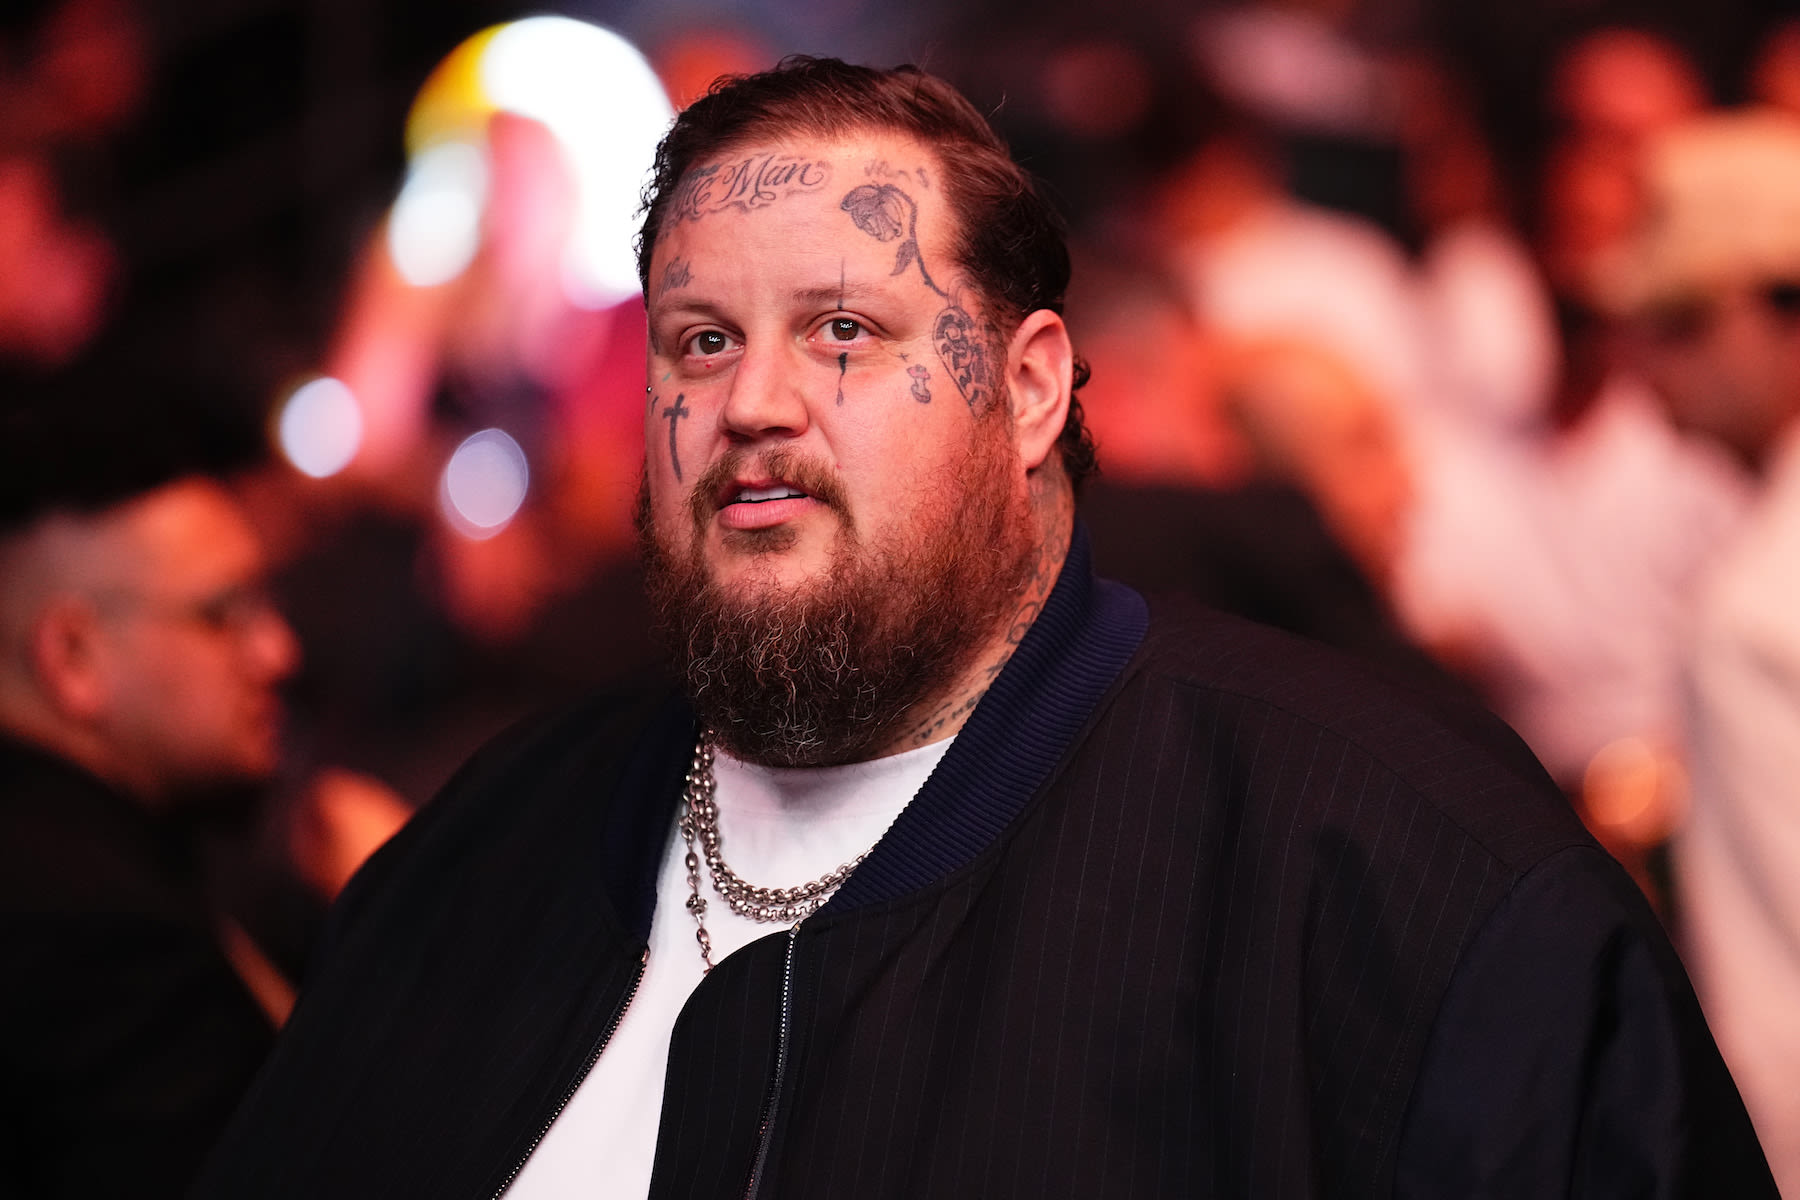 Jellyroll (Wedding Band) Withdraws Trademark Lawsuit Against Jelly Roll (Country Singer)